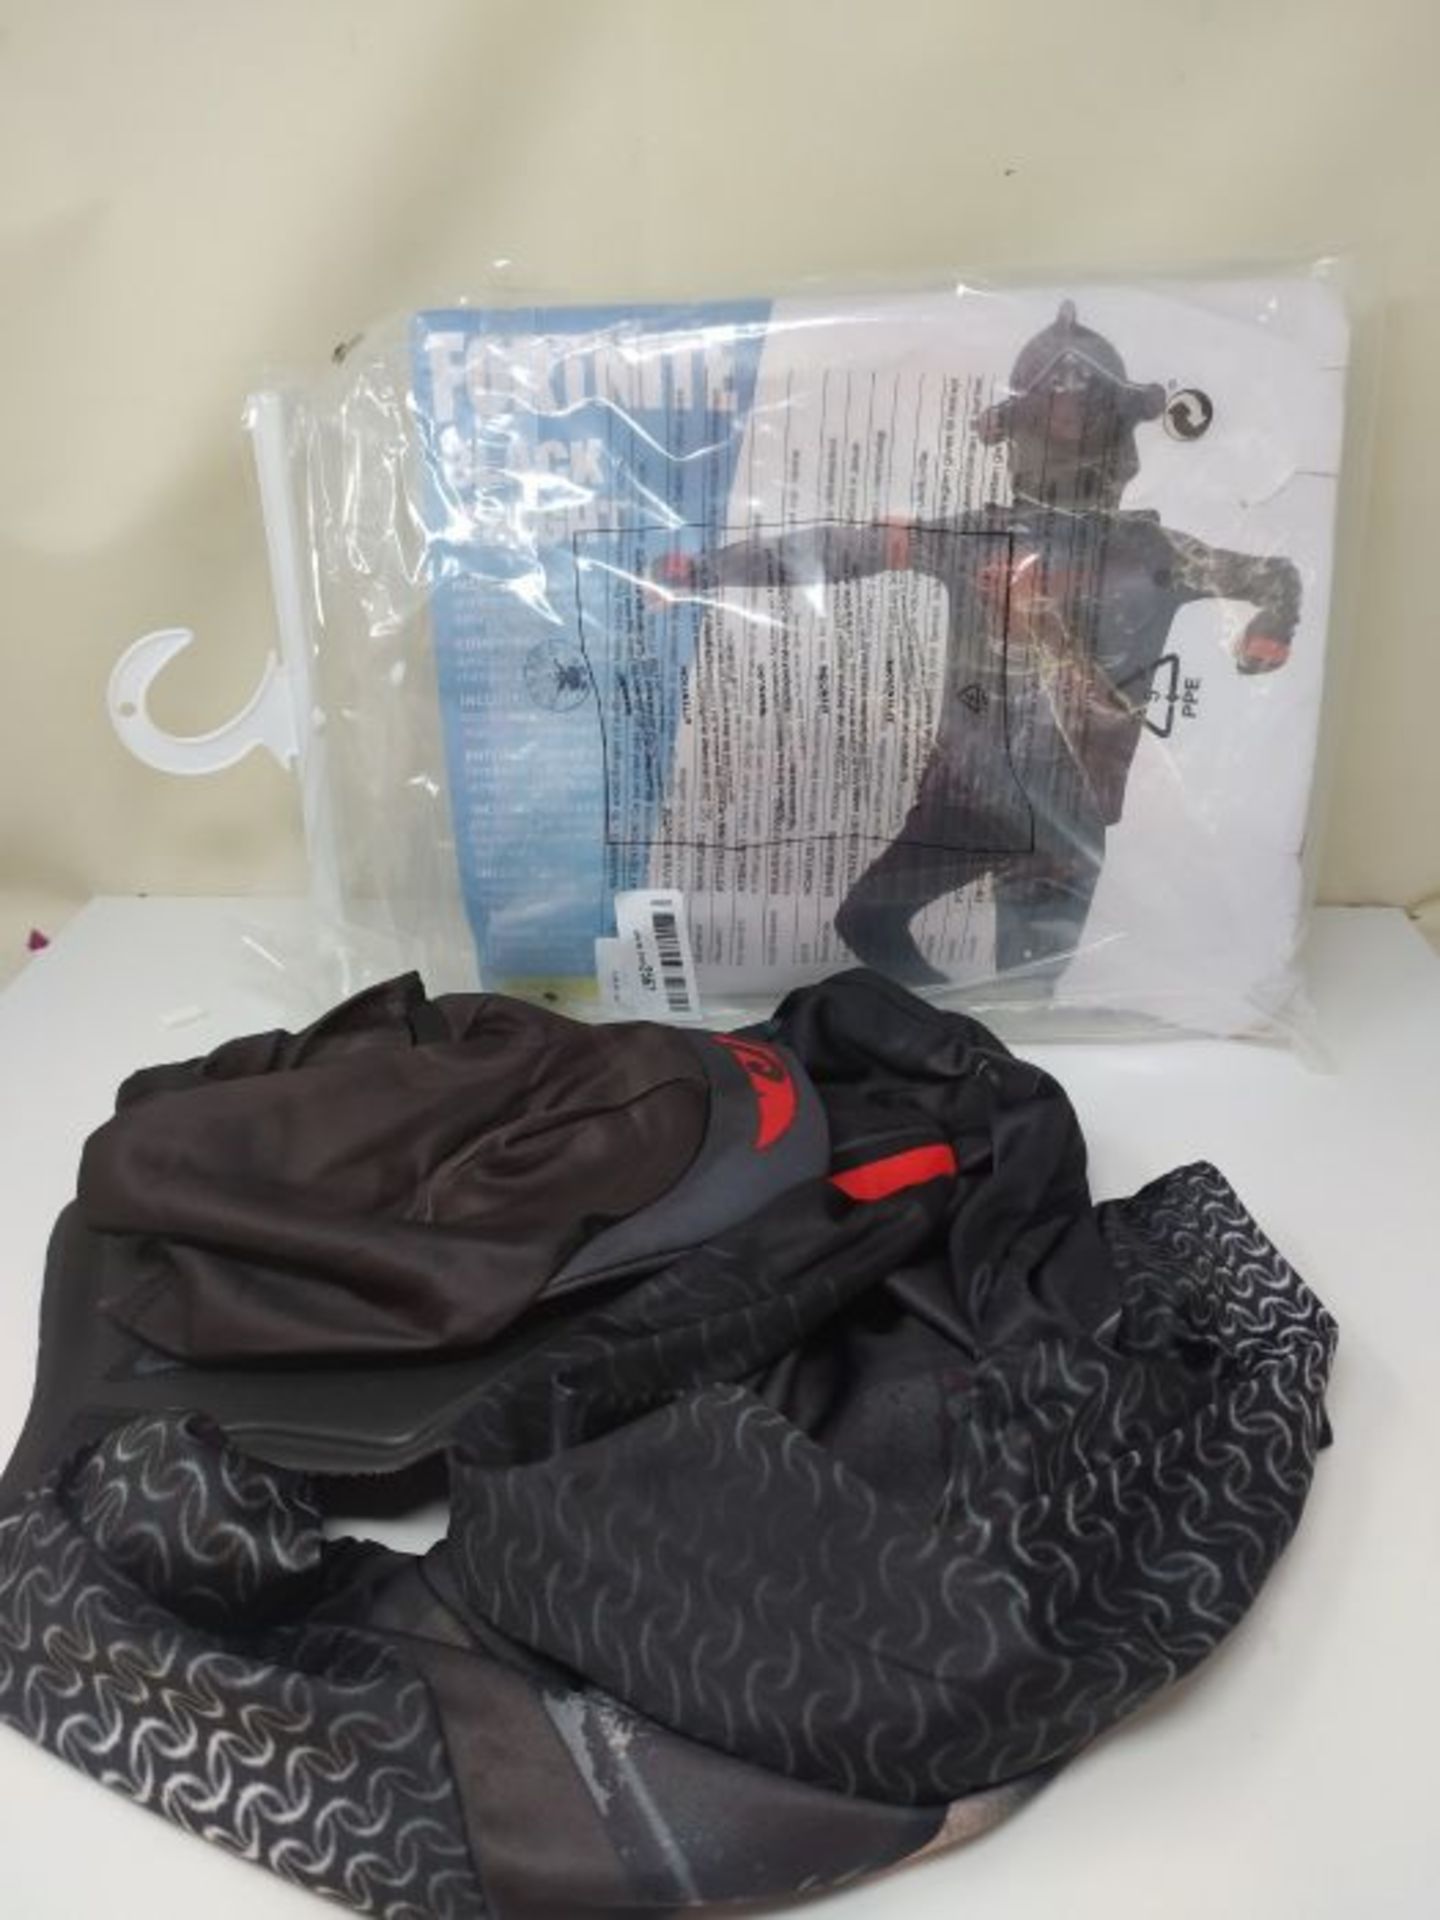 Rubie's Official Fortnite Black Knight Costume Kit, Childs Tween Size Medium, Height 1 - Image 2 of 2